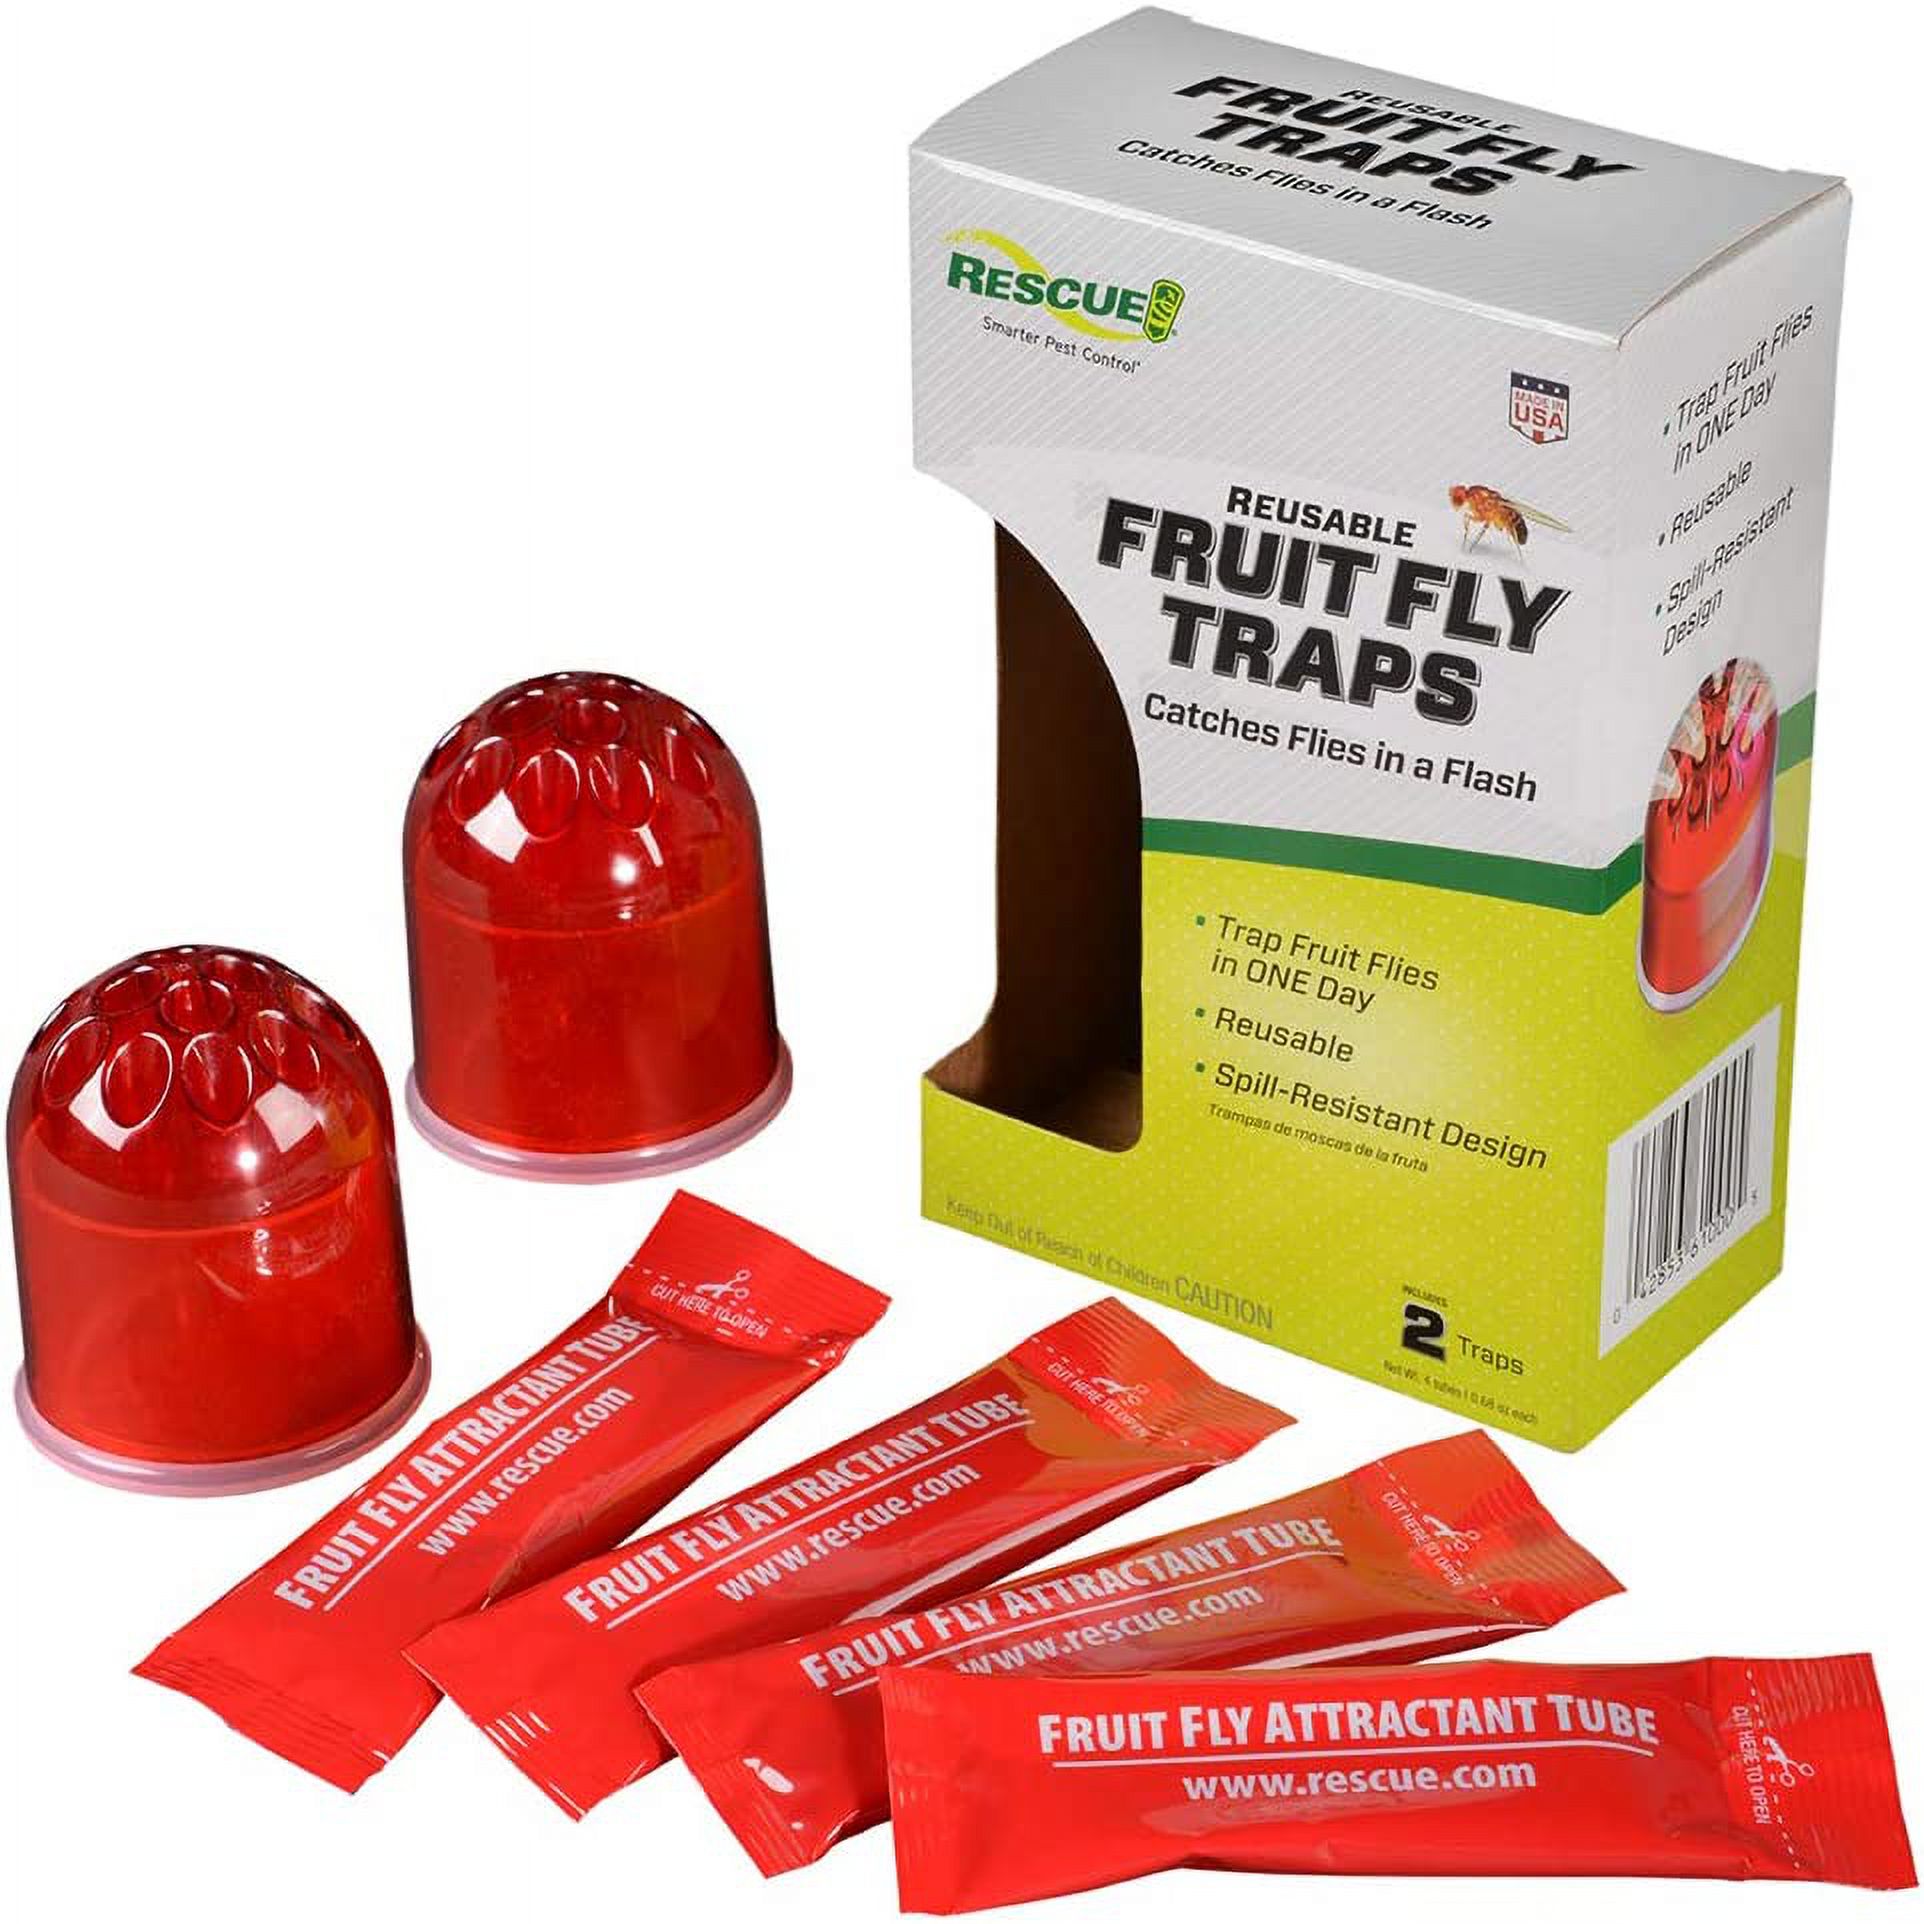 Rescue! FFTR2-SF6 Reusable Fruit Fly Trap, 2-Pack, Each - image 2 of 7